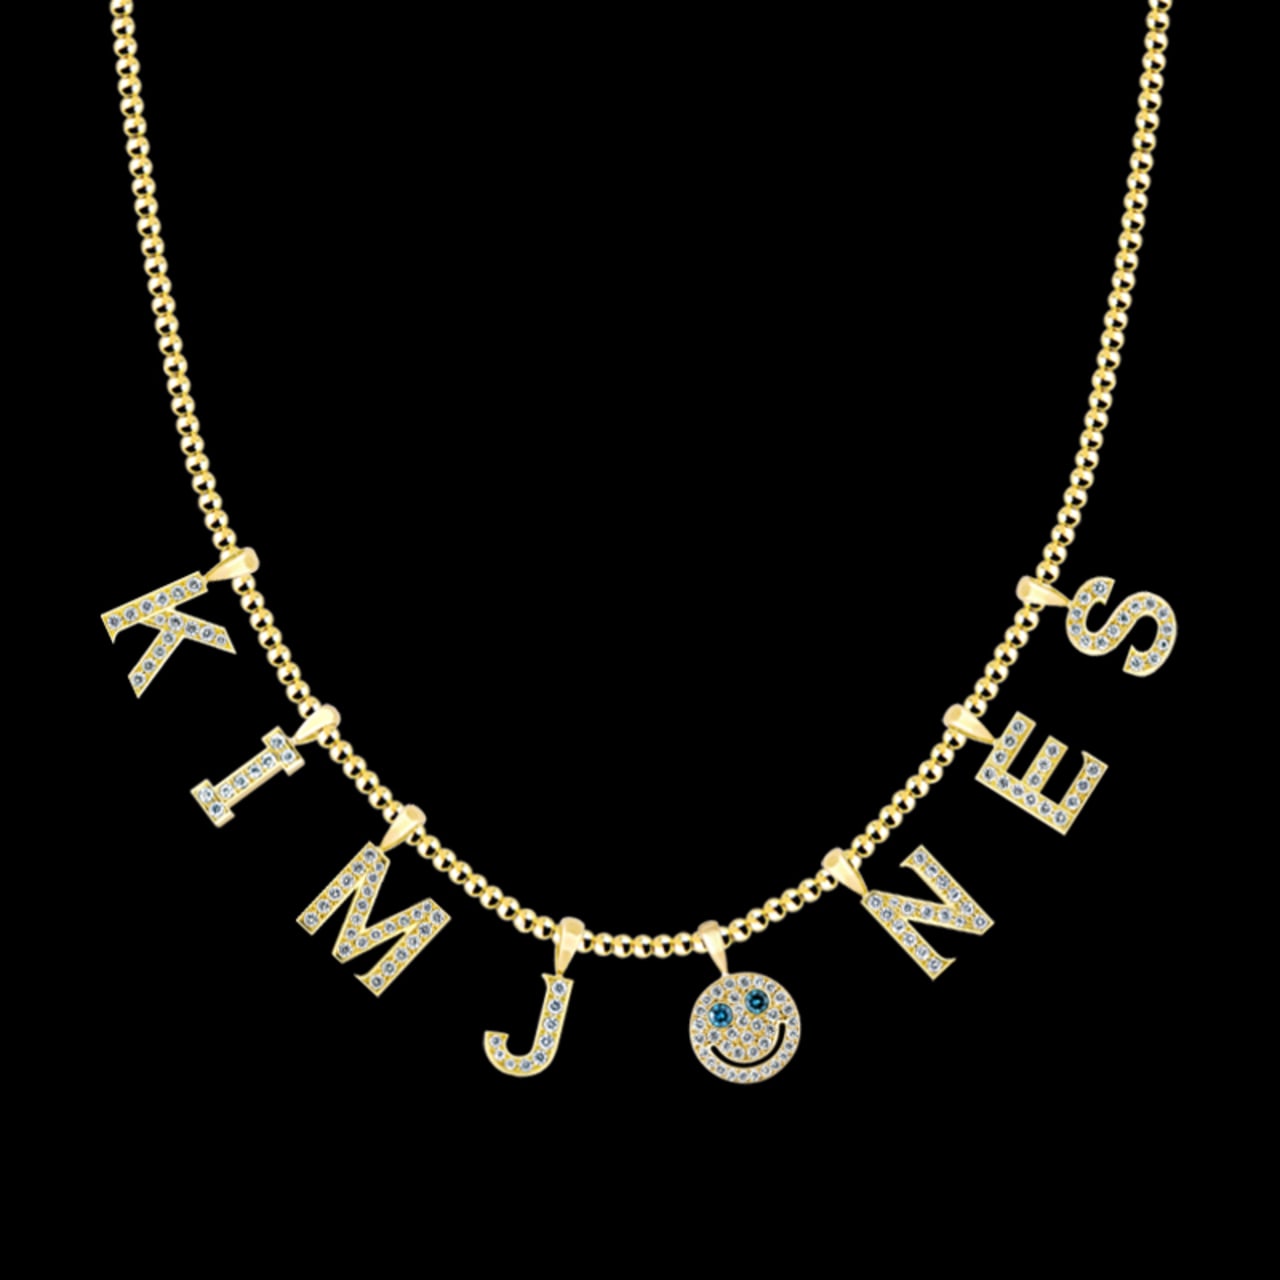 EYEFUNNY Is the New Jewelry Brand You Need to Know | Complex